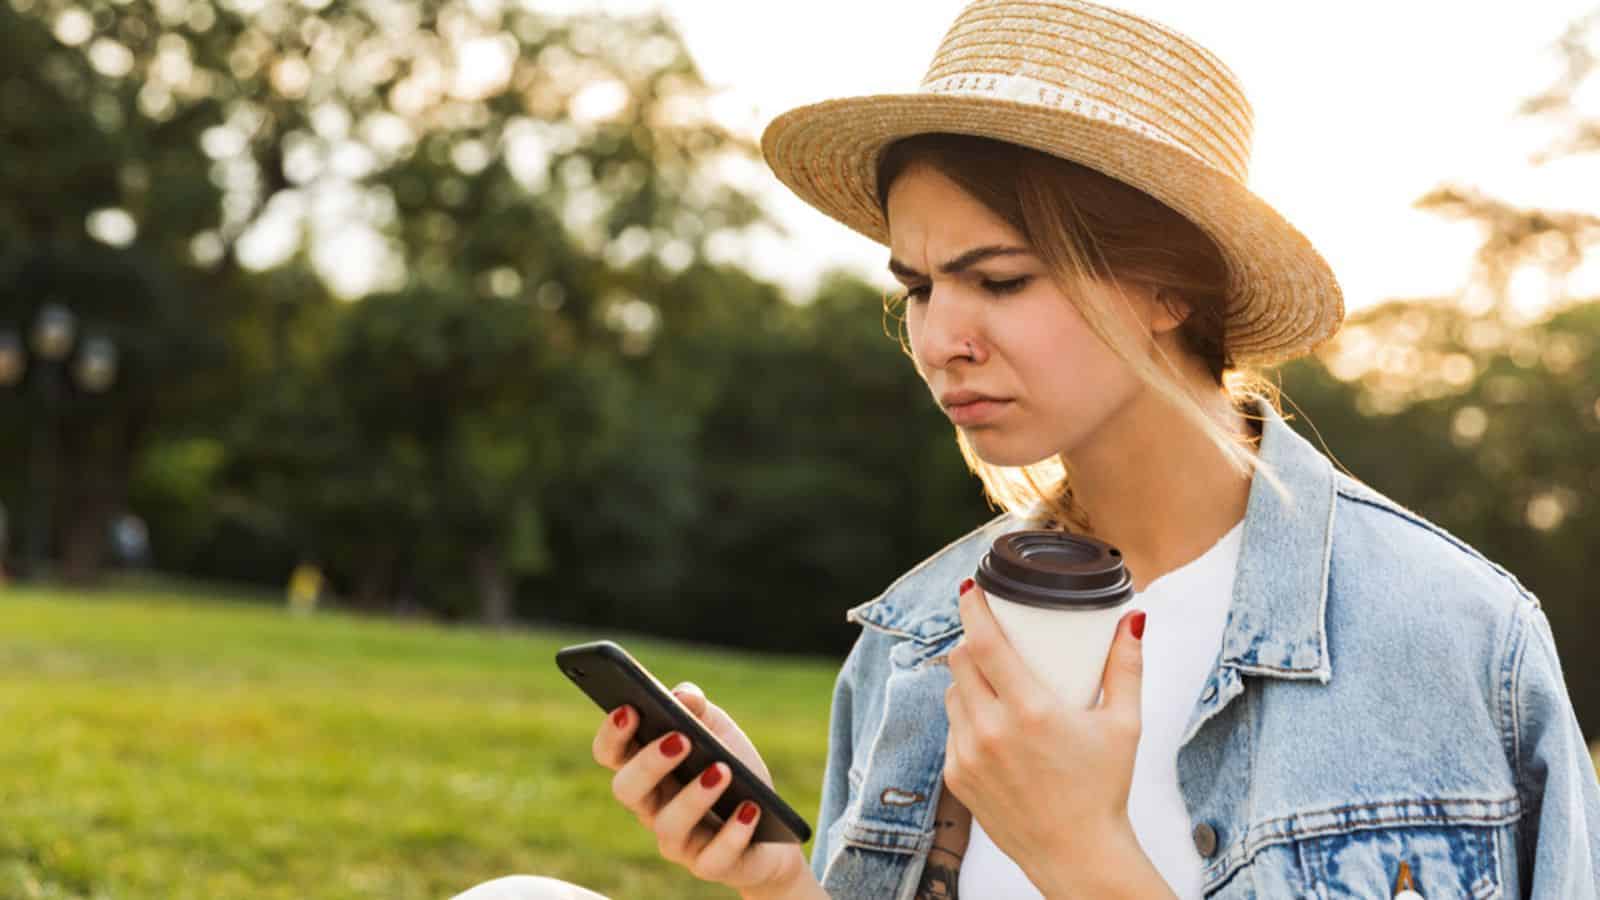 Upset young girl sitting on grass at the park, using mobile phone, holding cup oof coffee